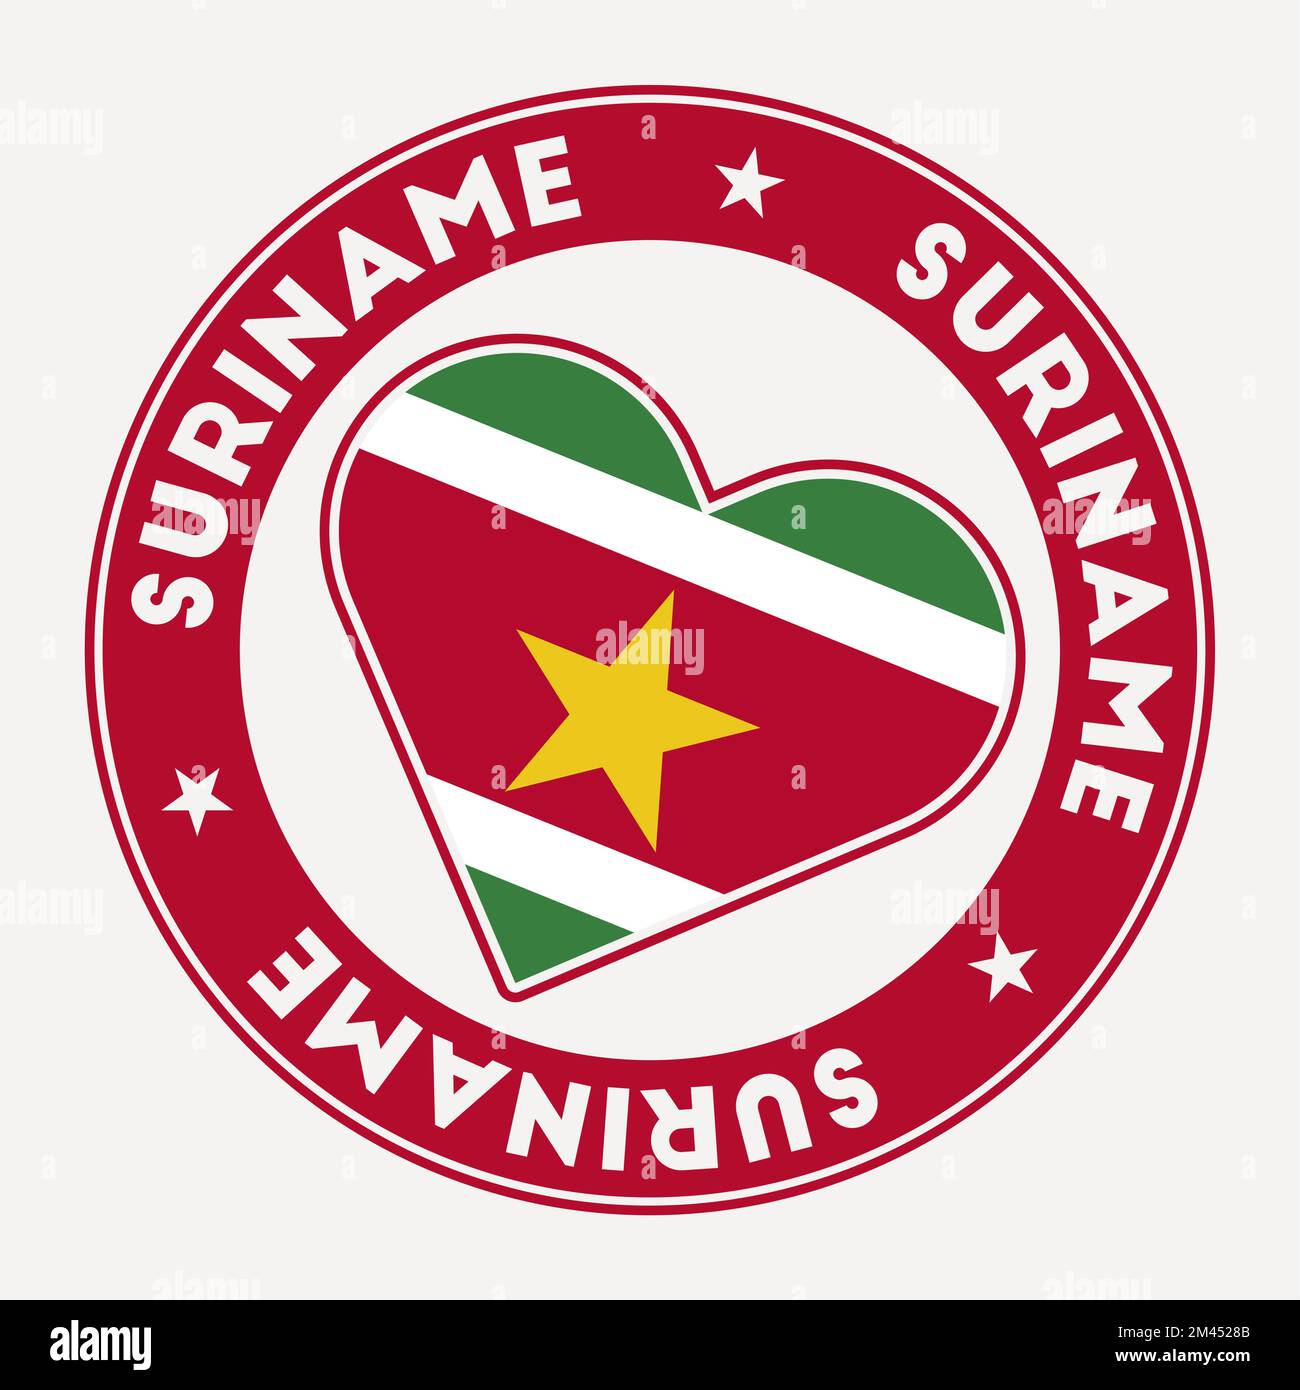 Suriname heart flag badge. From Suriname with love logo. Support the country flag stamp. Vector illustration. Stock Vector